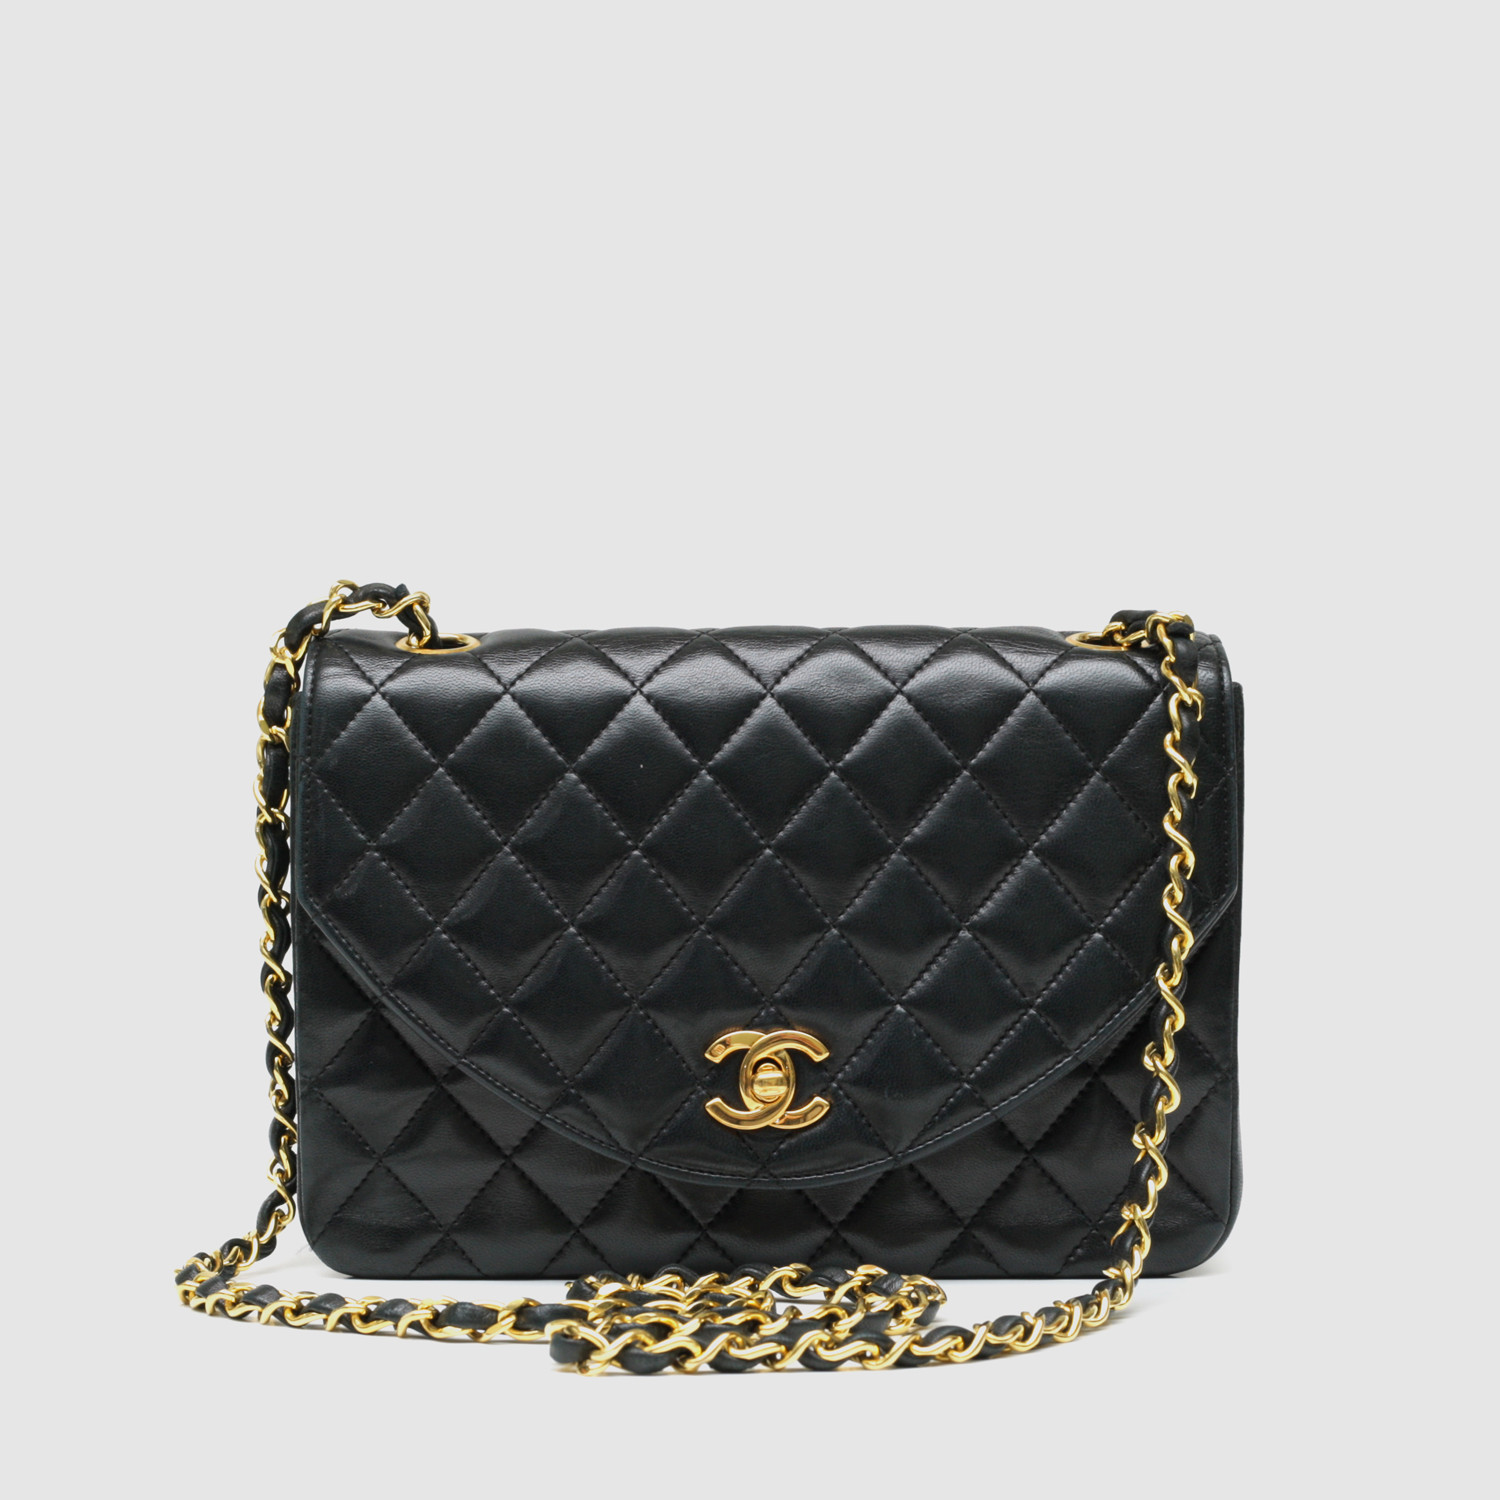 Chanel Small Flap Bag // Black Quilted Lambskin - Vintage Luxury Handbags - Touch of Modern